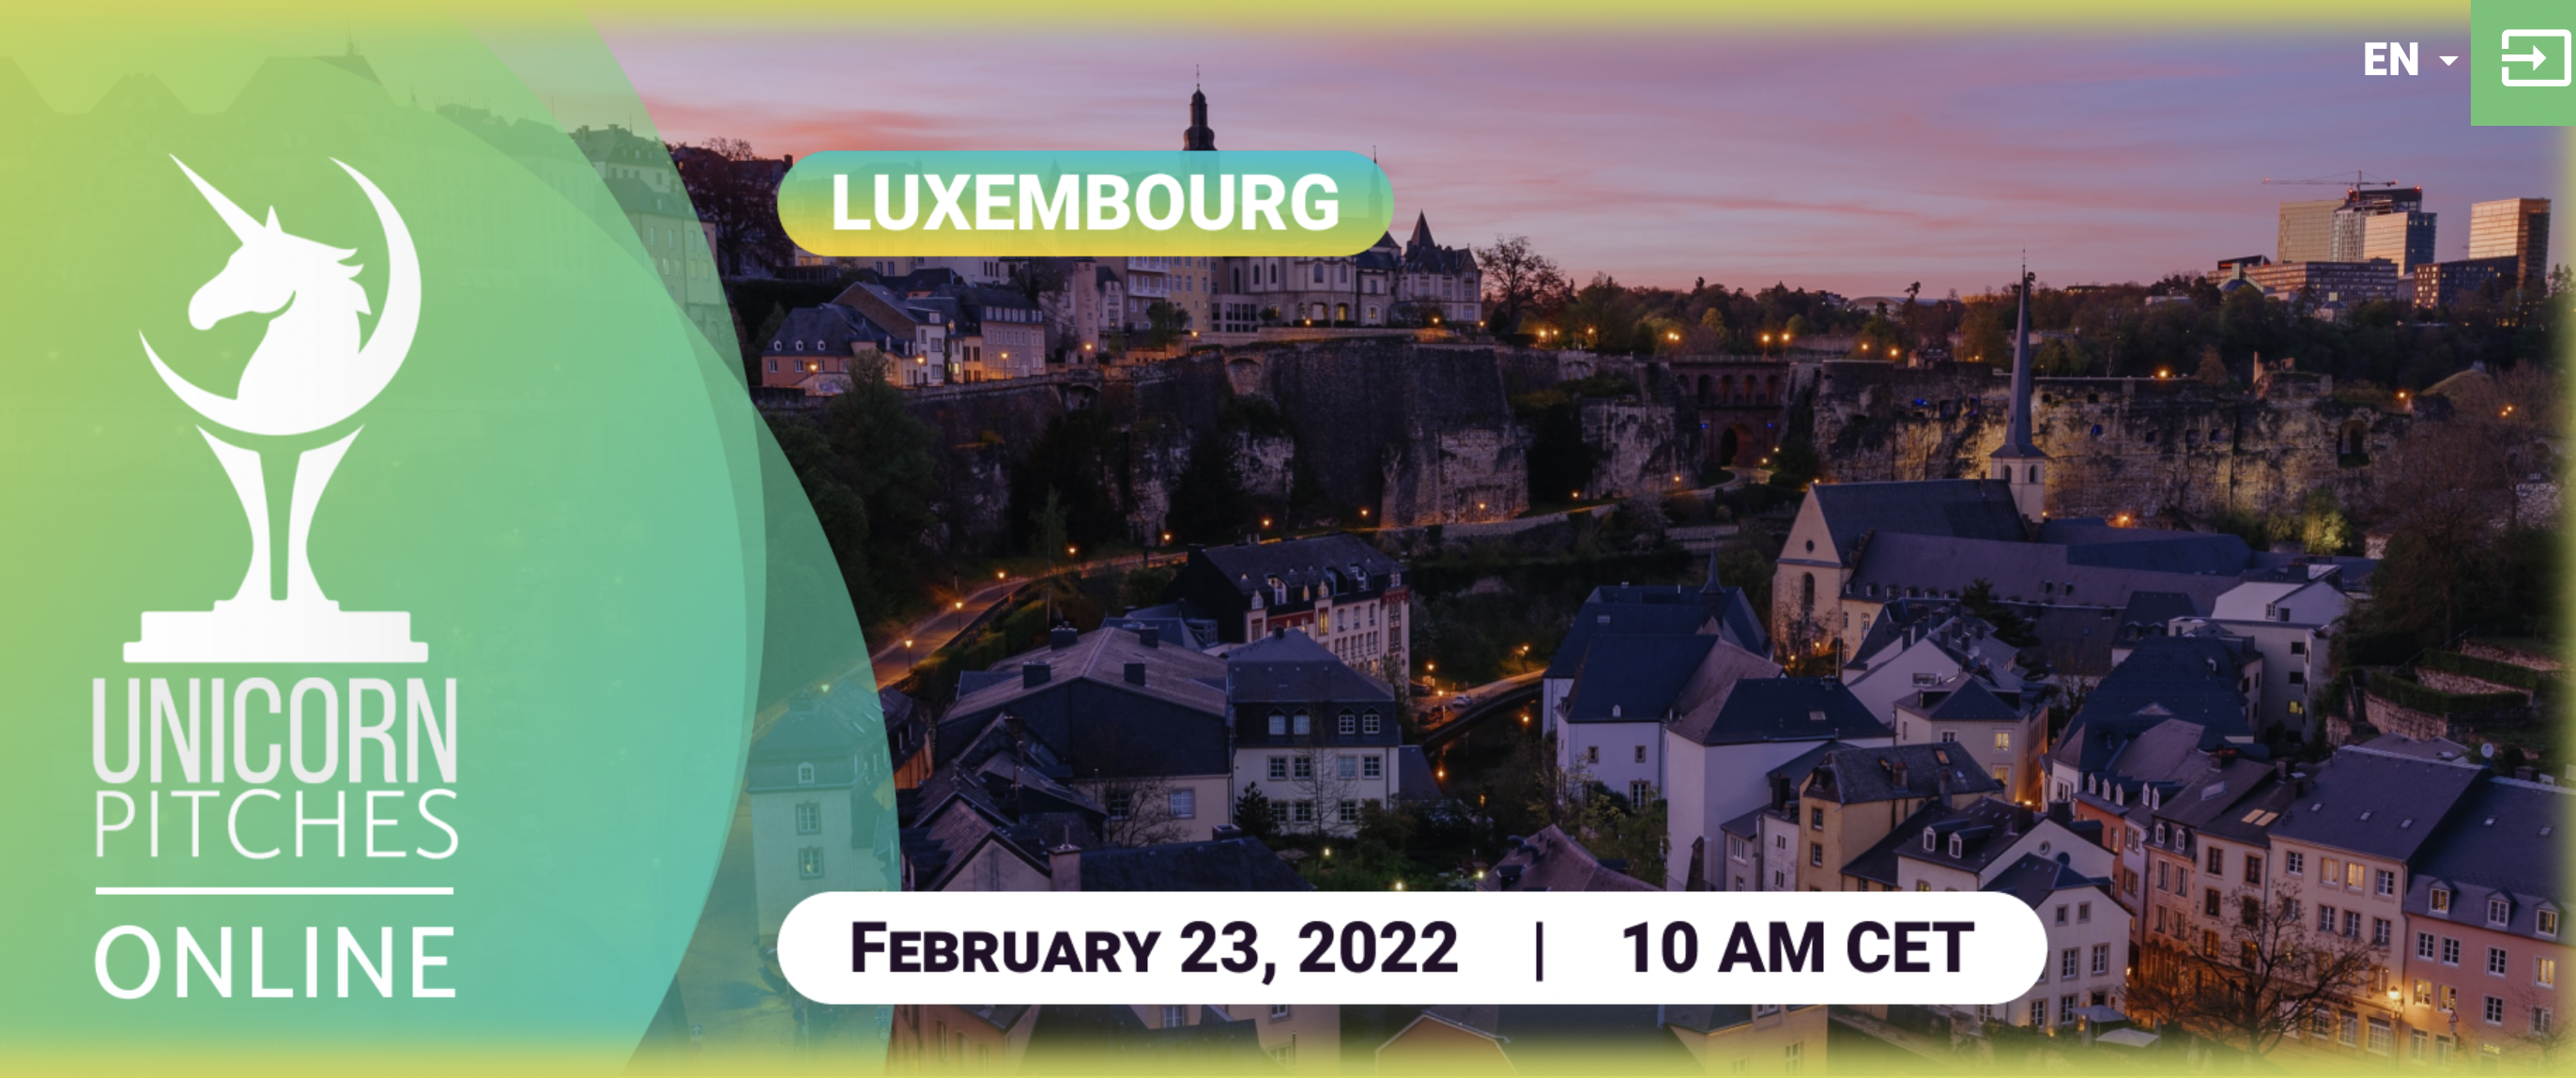 Unicorn Pitches in Luxembourg, February 23 2022